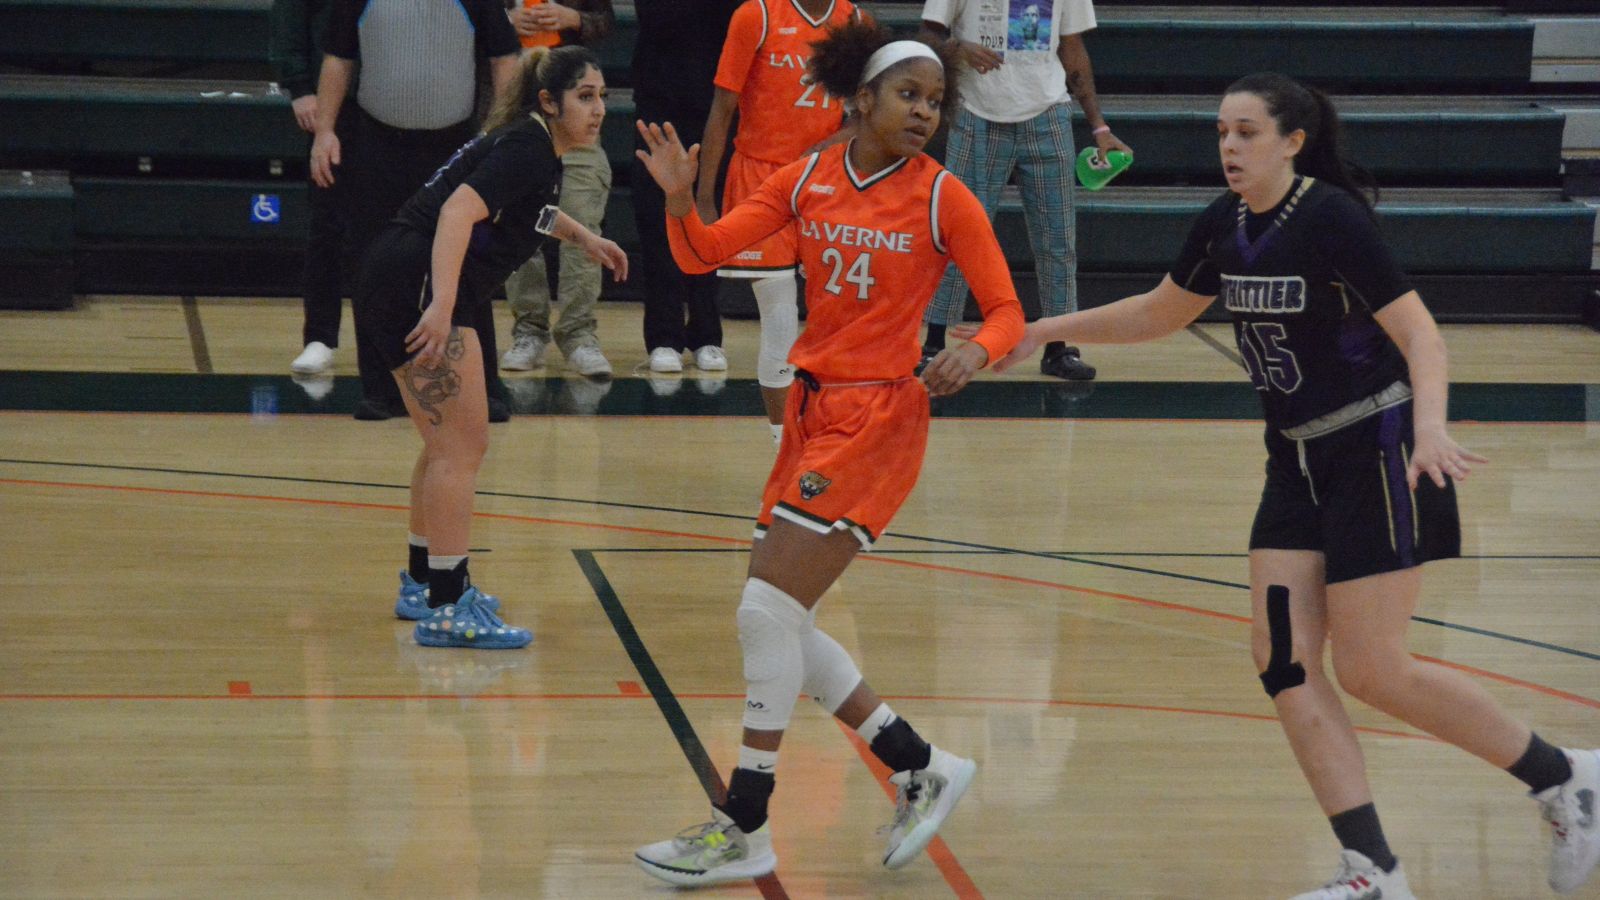 Leopards Sweep Caltech To Remain Undefeated In SCIAC Play